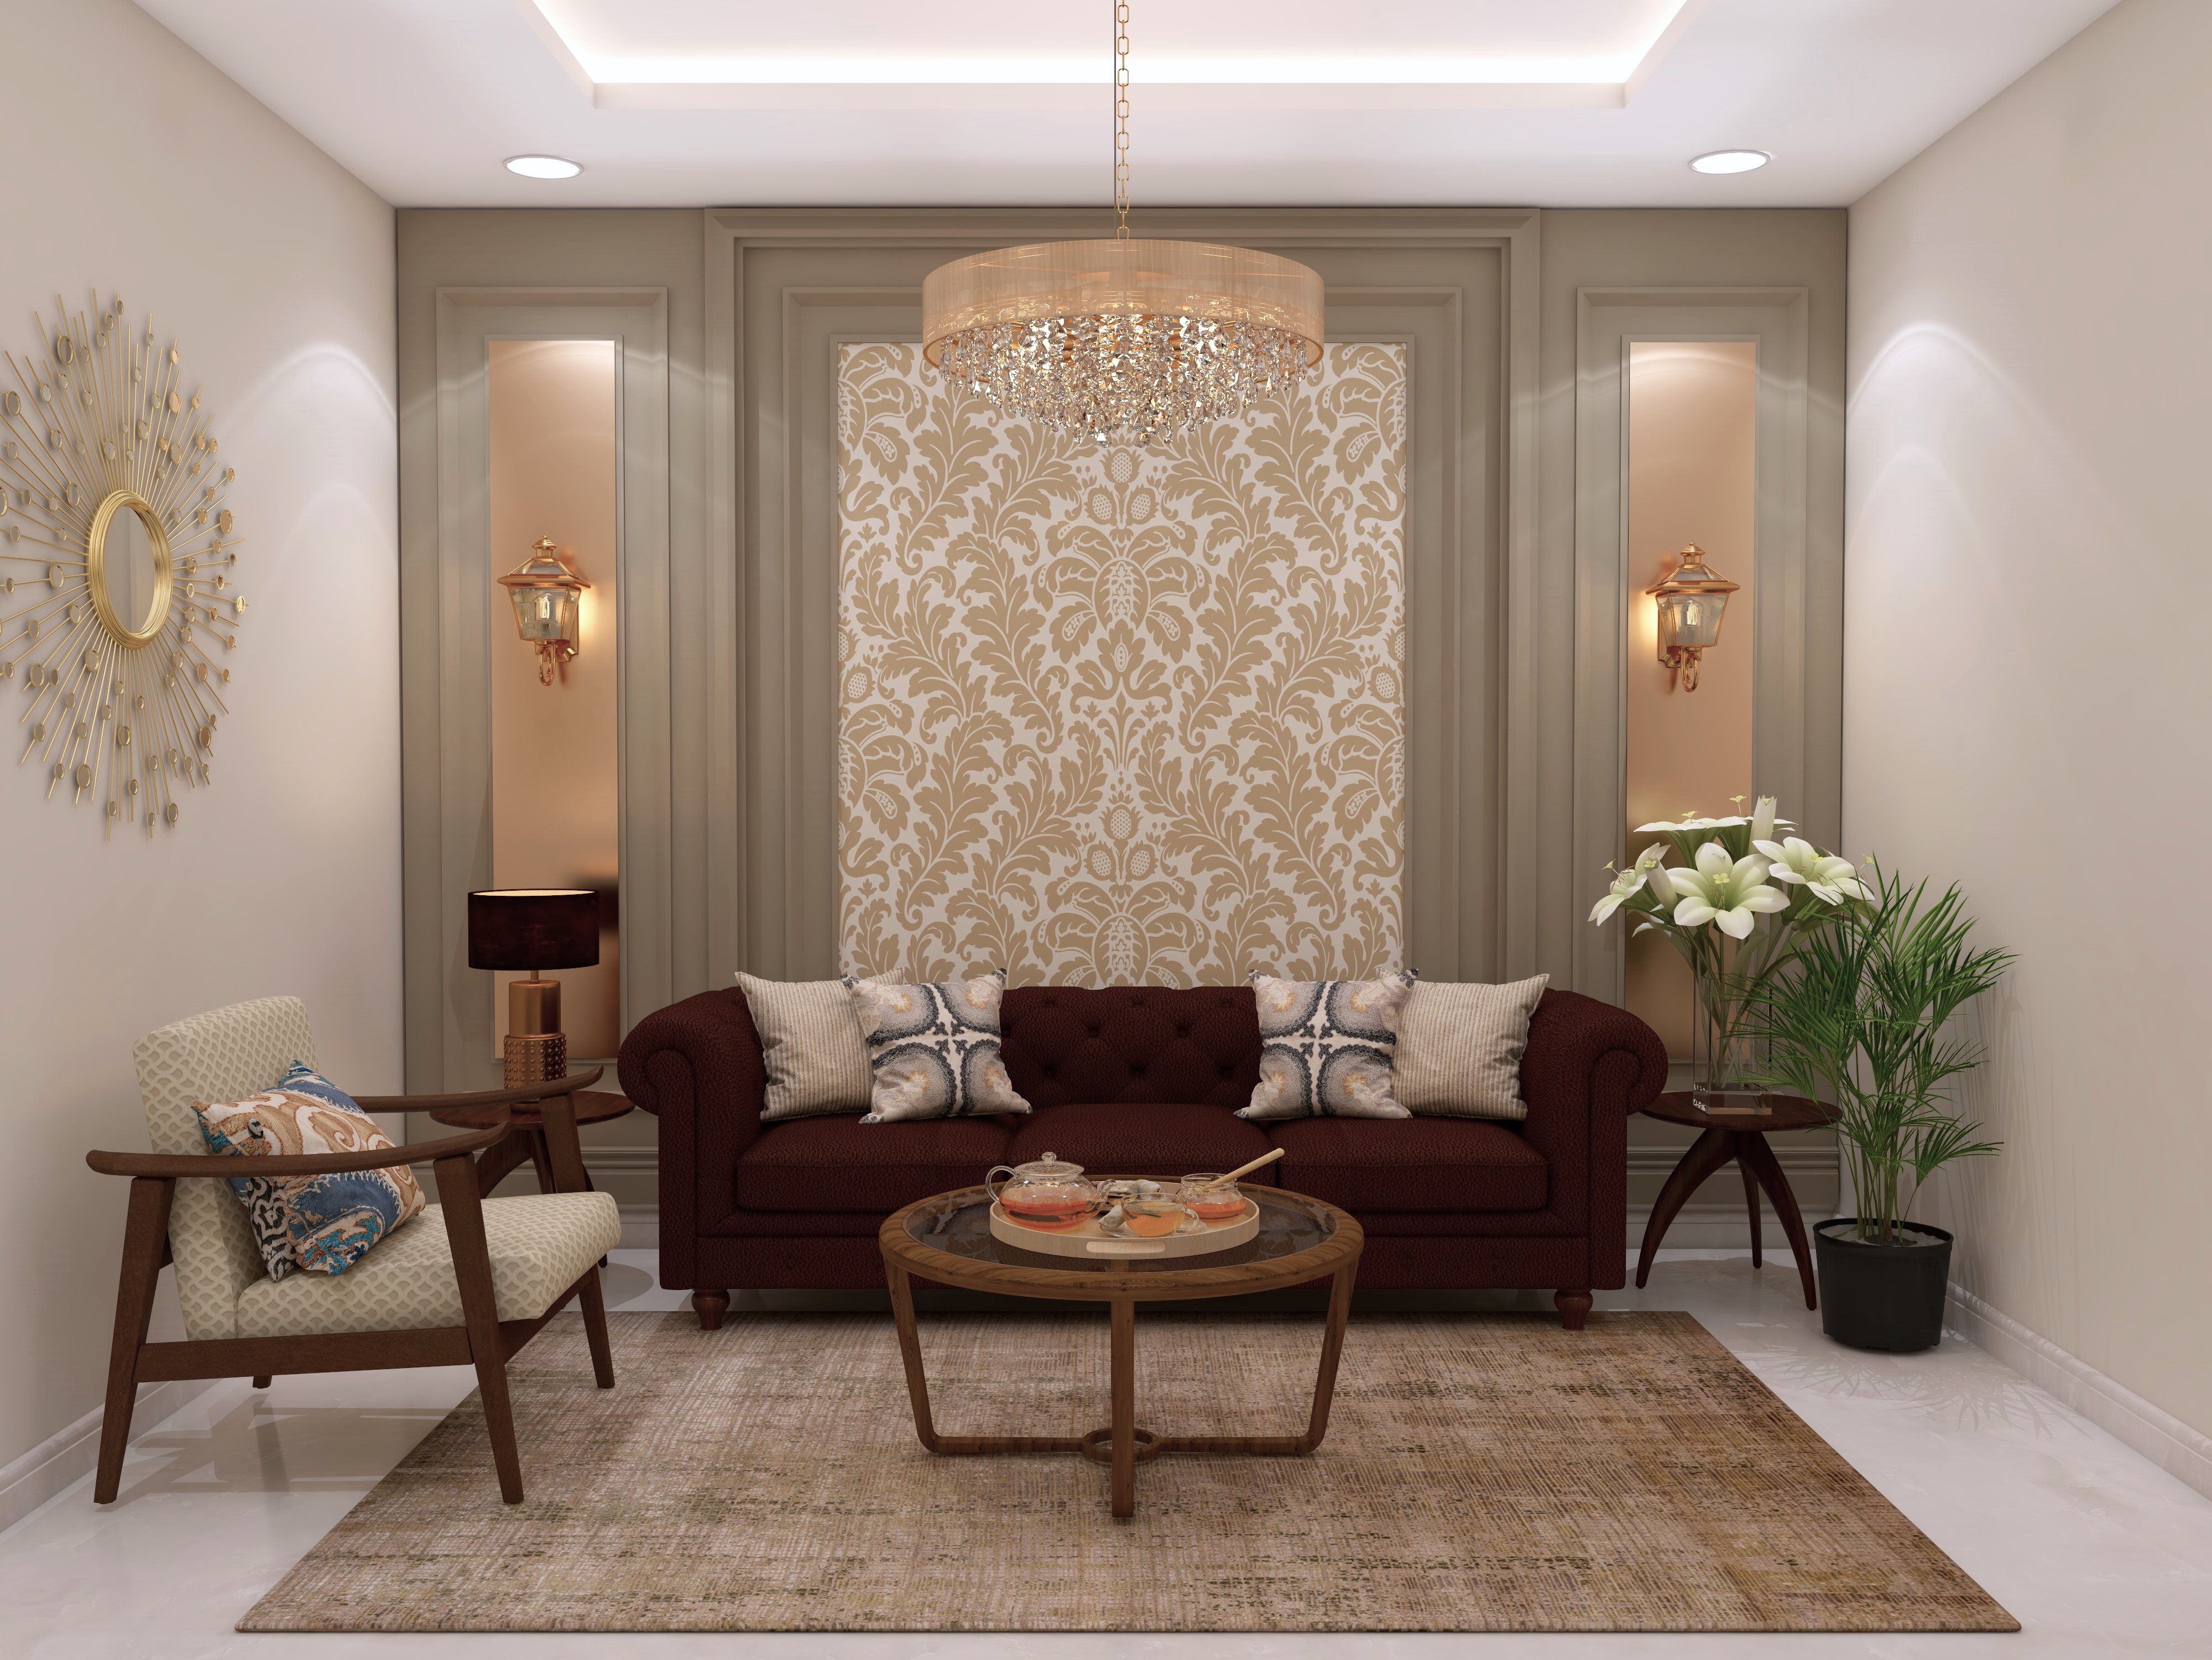 Modern indian style with Nilaya wallpaper and AP chesterfield sofa - Beautiful Homes